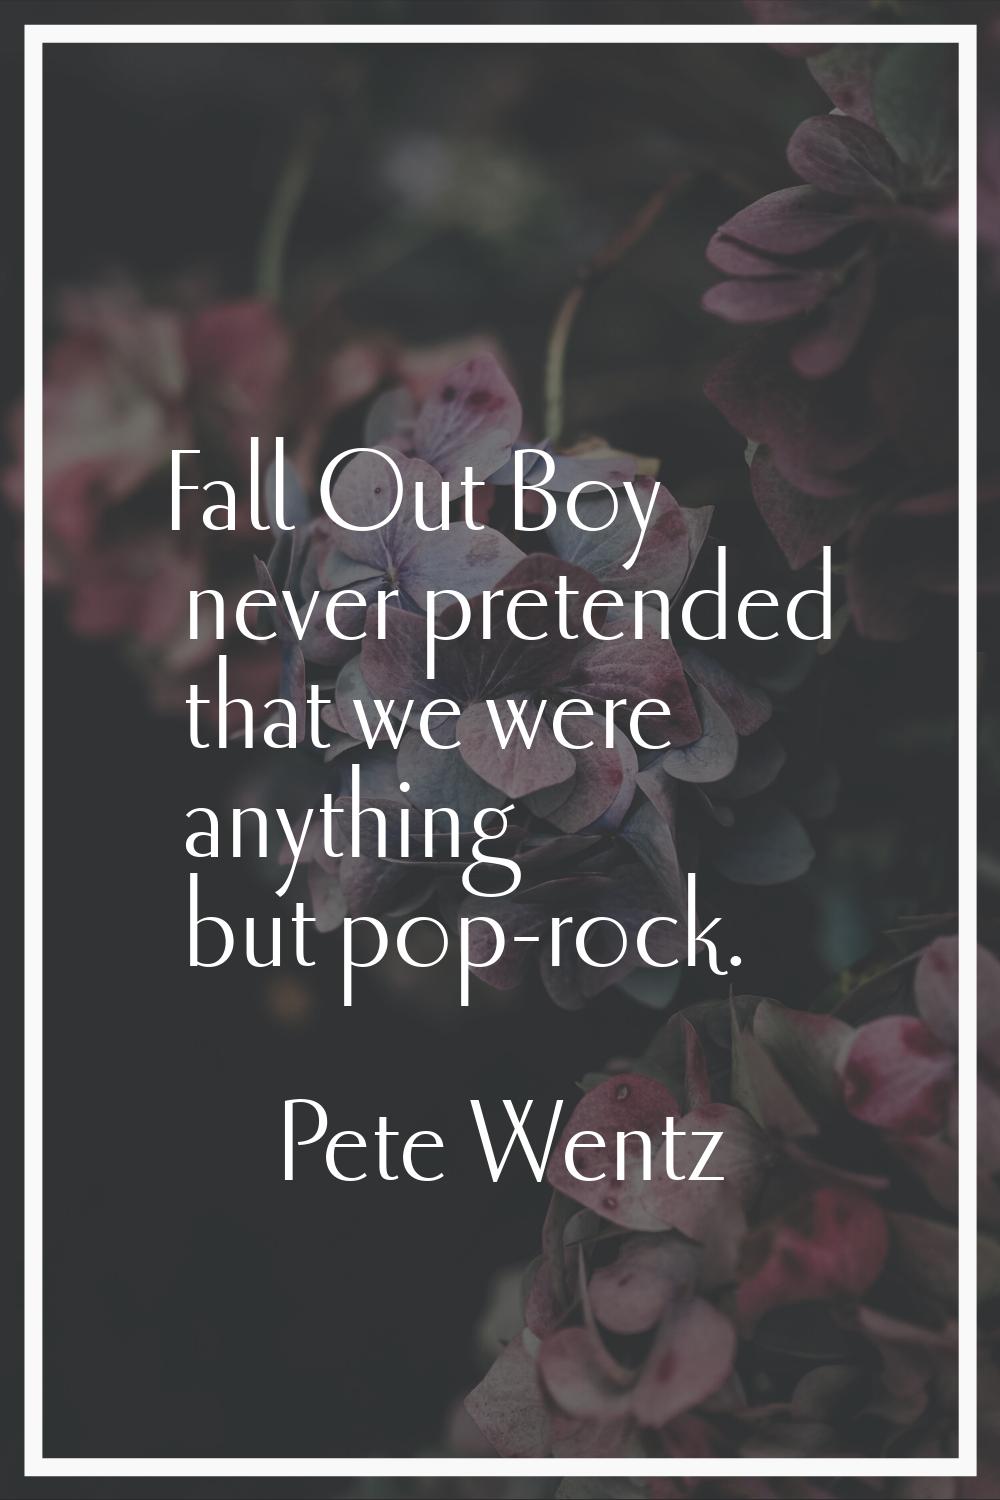 Fall Out Boy never pretended that we were anything but pop-rock.